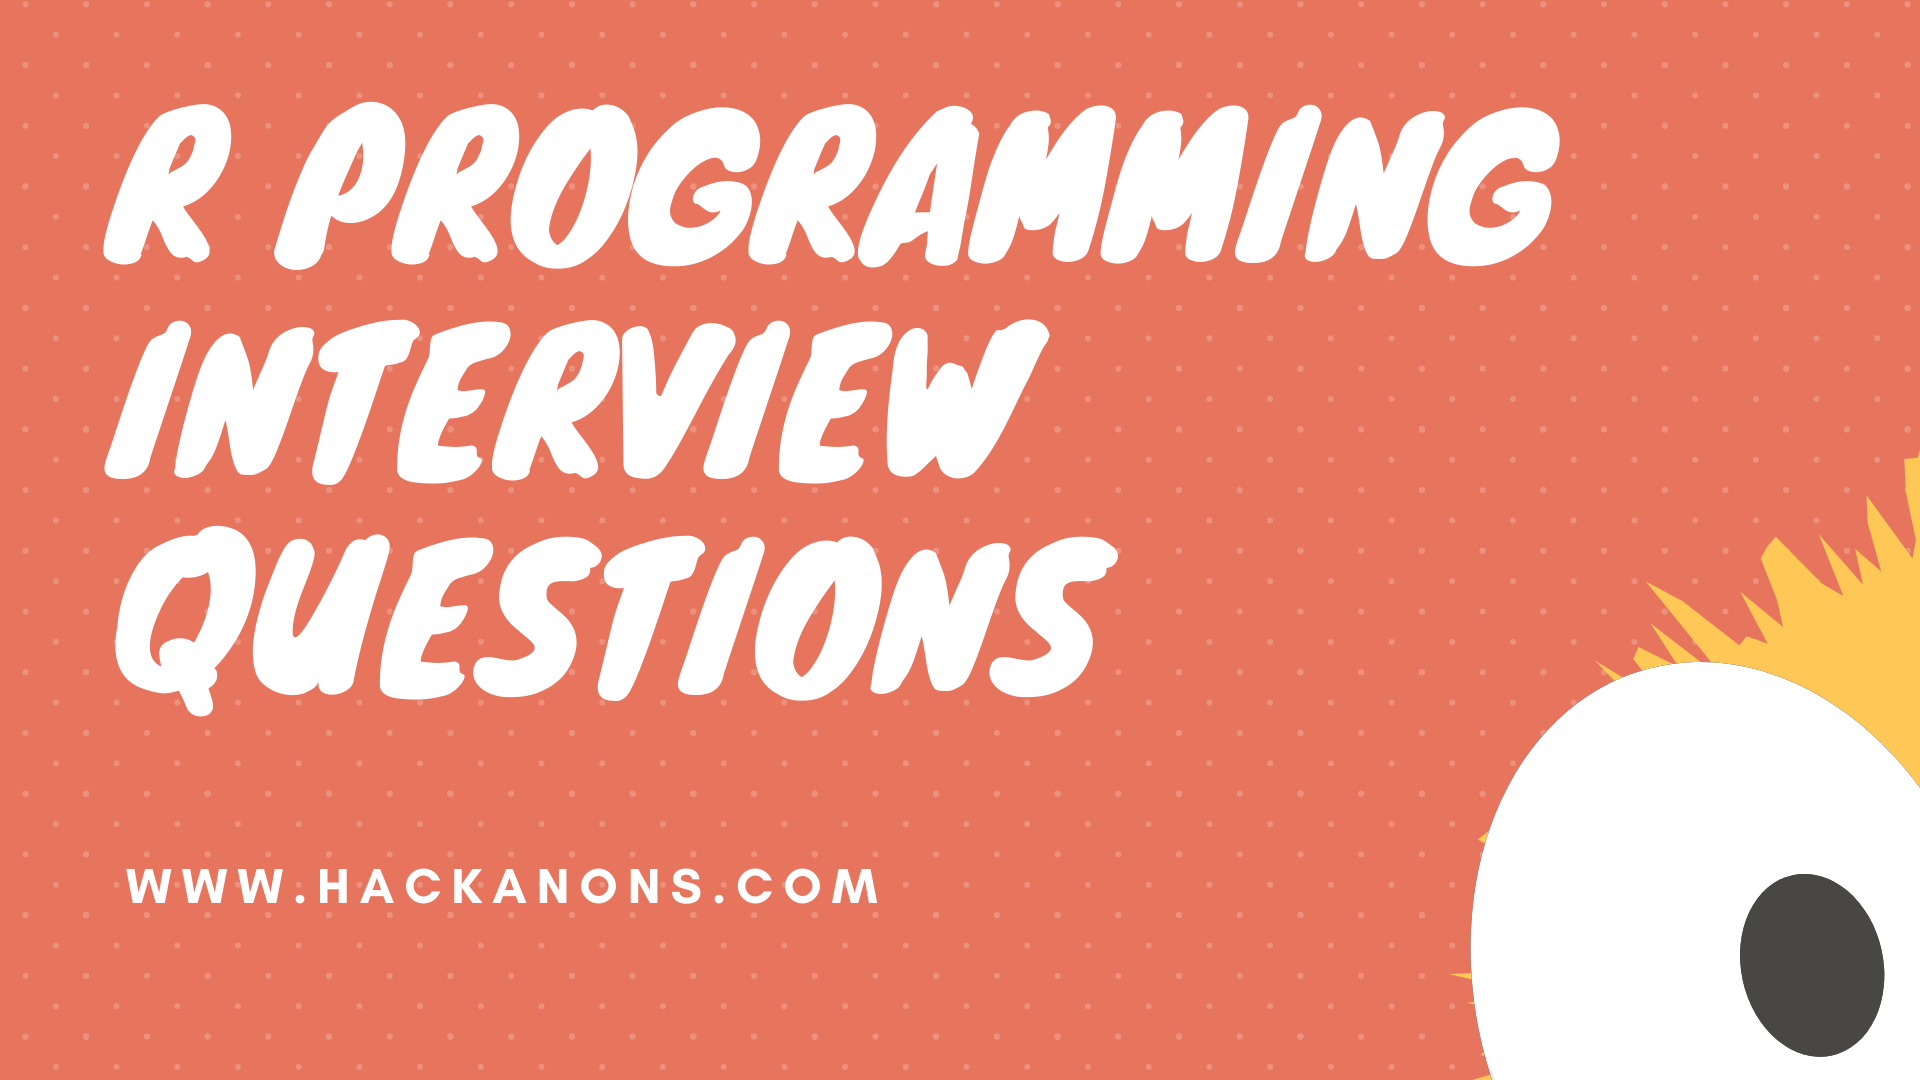 R PROGRAMMING INTERVIEW QUESTIONS